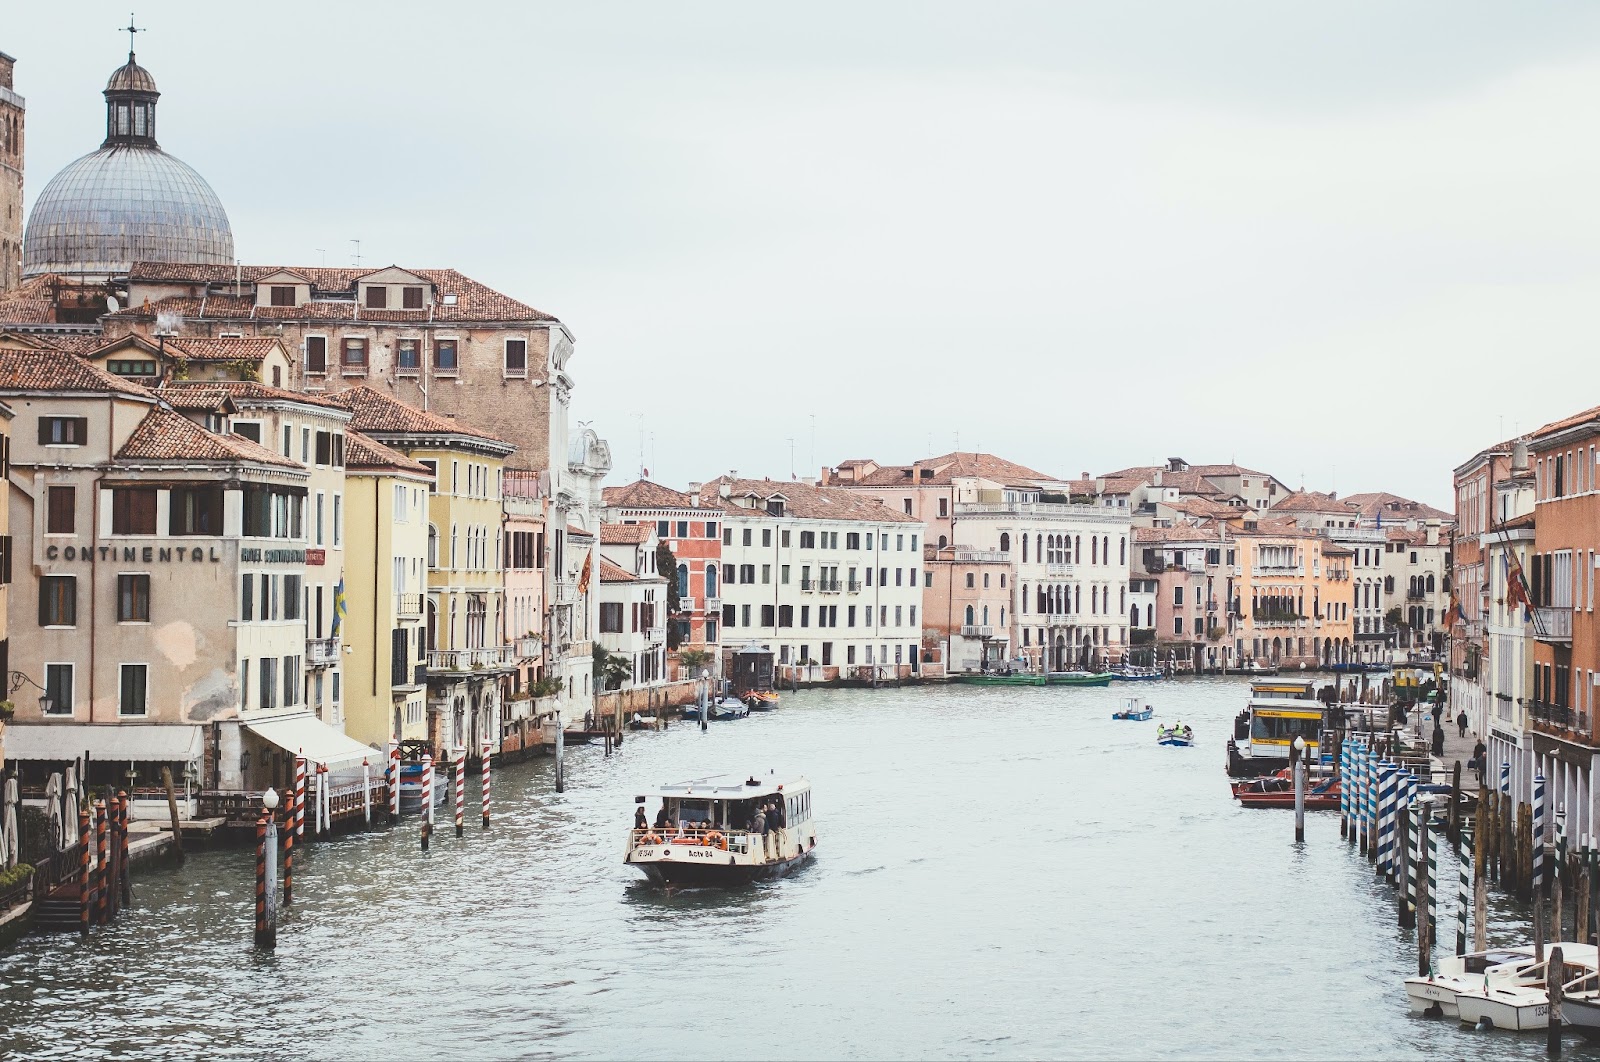 Breathtaking views of Venice's Grand Canal with a vaporetto enjoying the scenery. 